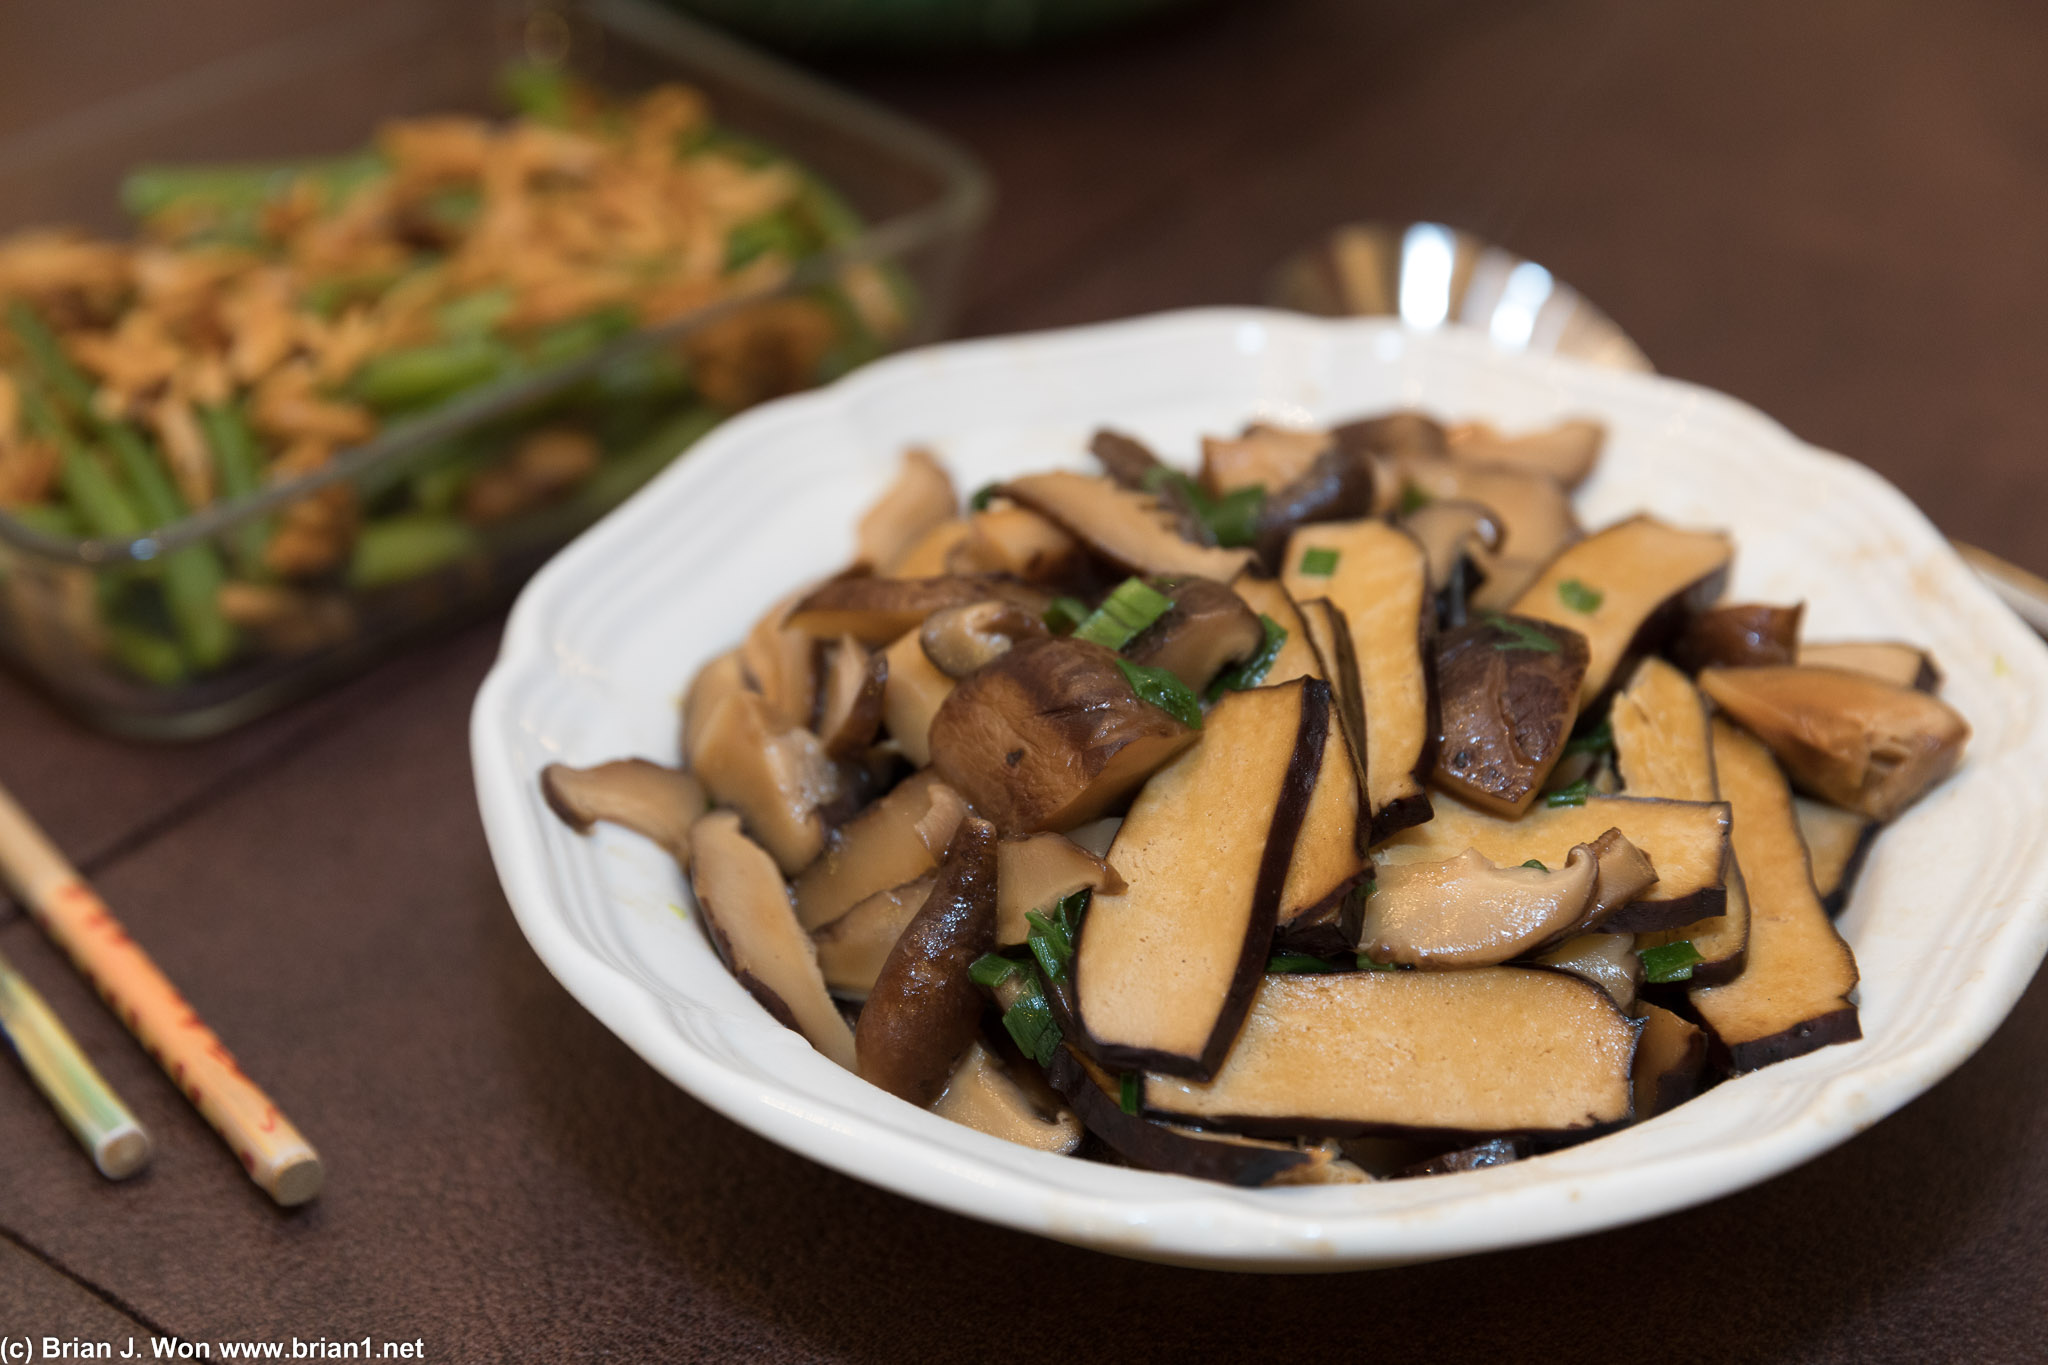 Bean curd and two kinds of mushrooms.